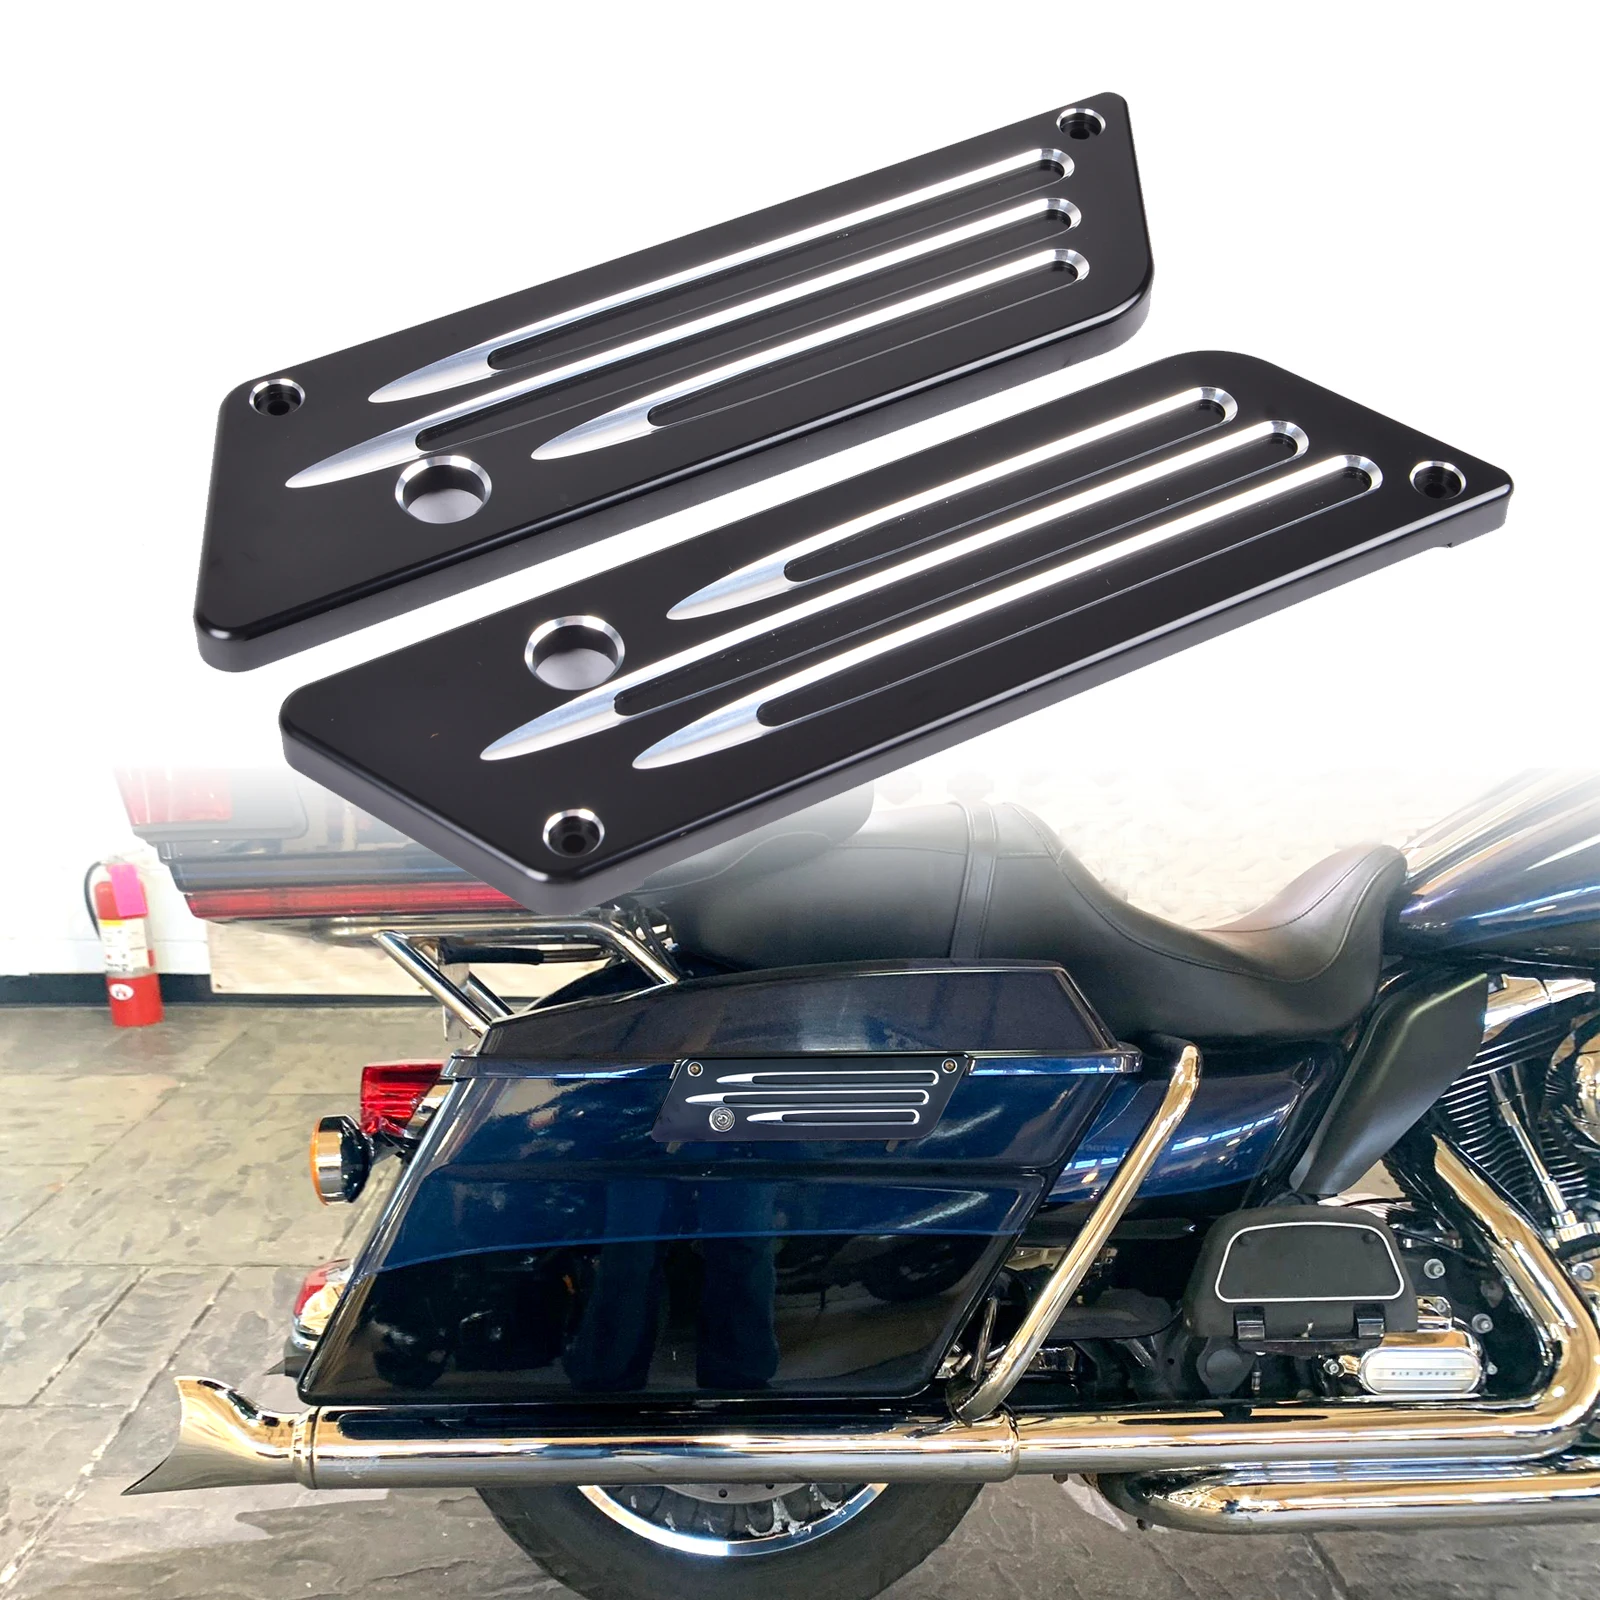 

Motorcycle Saddlebag Latch Cover With Mounting Screws For Harley Touring Electra Glide Road King Street Glide FLH FLT 1993-2013